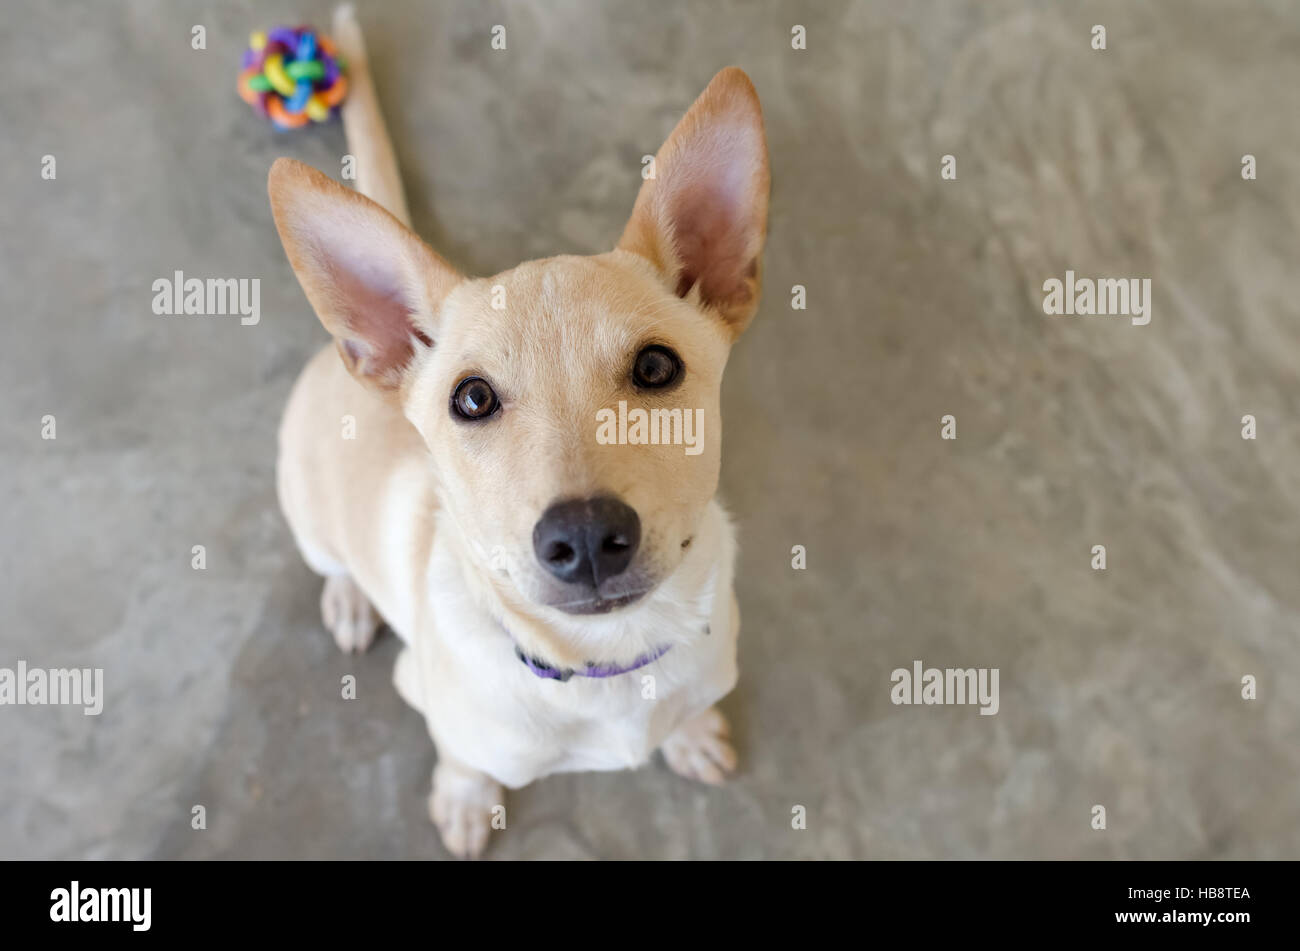 Dog toy is a cute puppy dog looking up wanting someone to play with him and his toy. Stock Photo